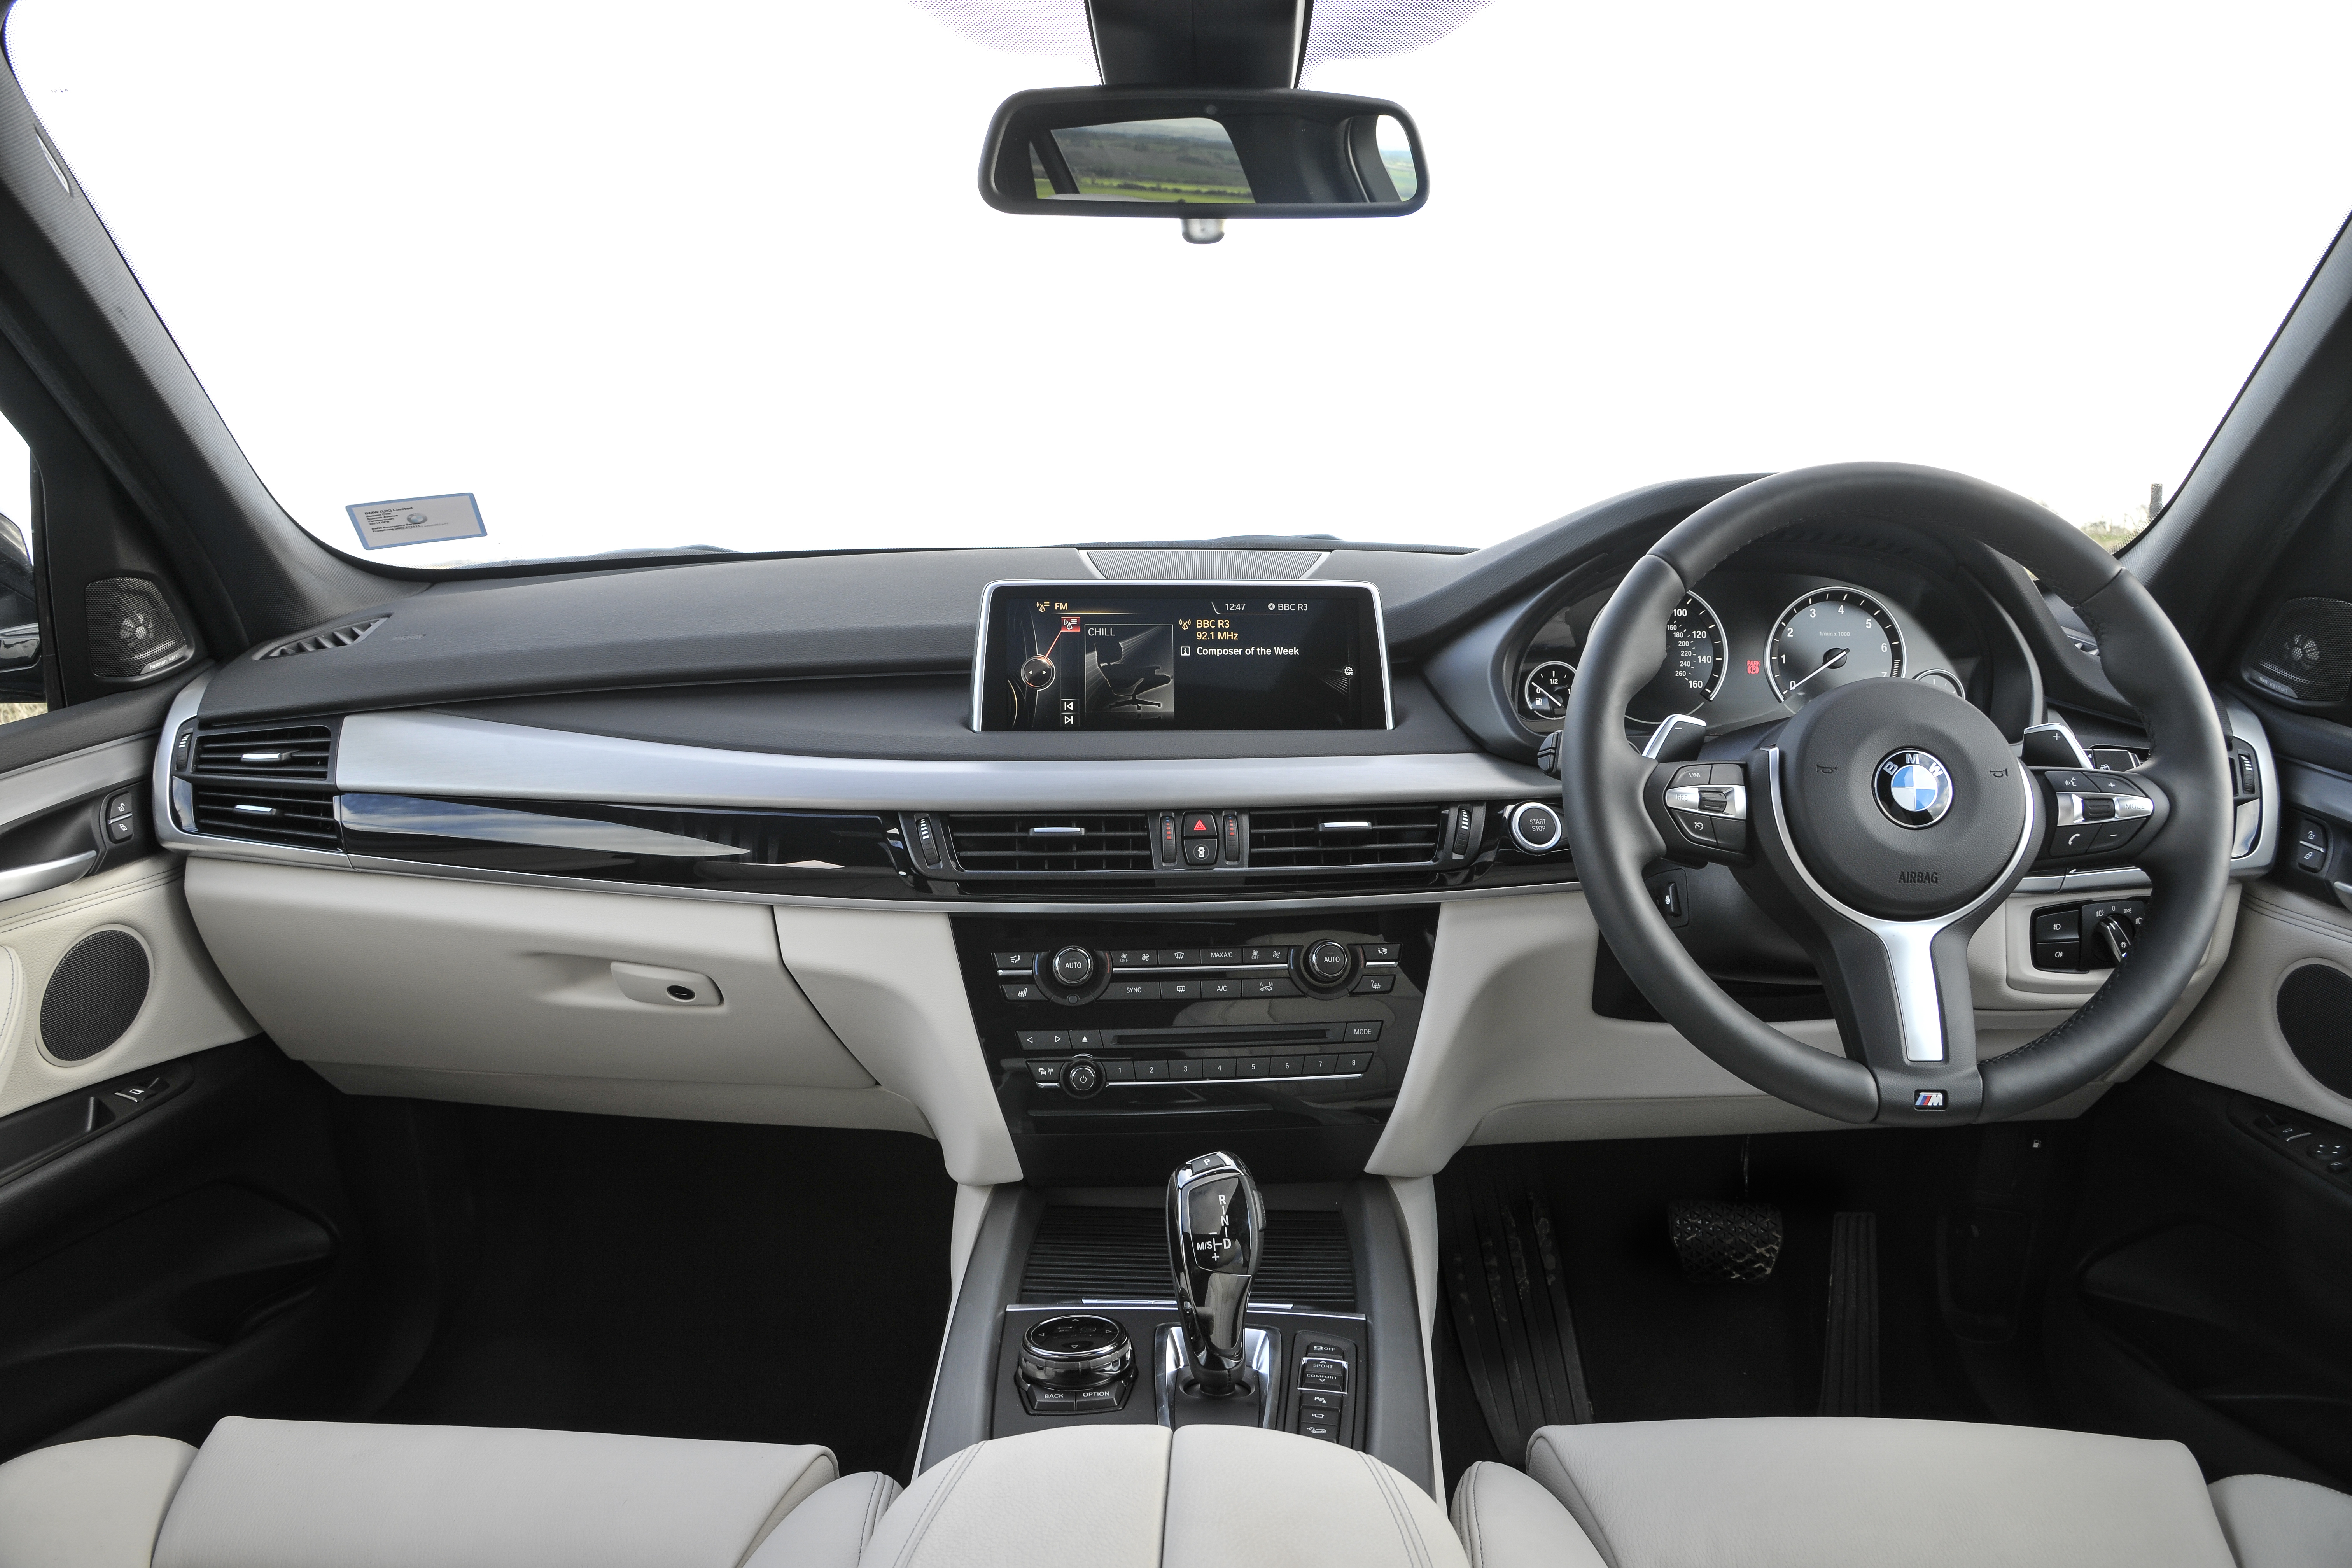 The X5's well-built interior lacks a little extra something